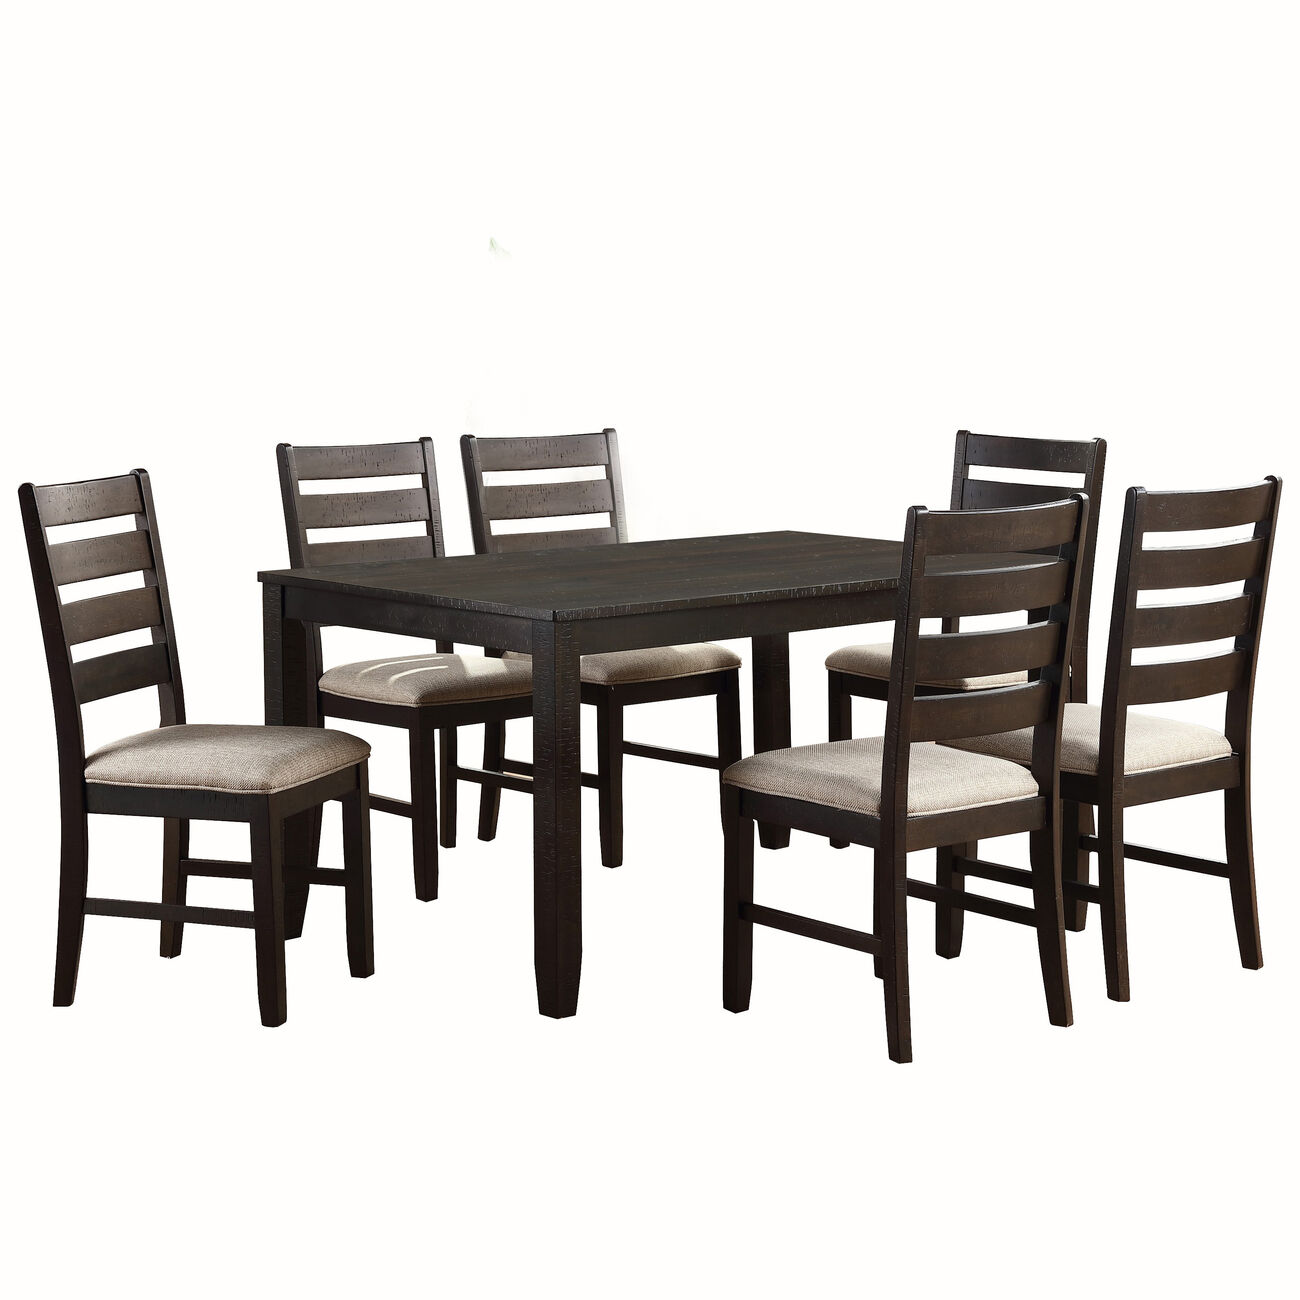 Wooden Dining Table with Ladder Back Style Chairs,Set of 7, Brown and Beige